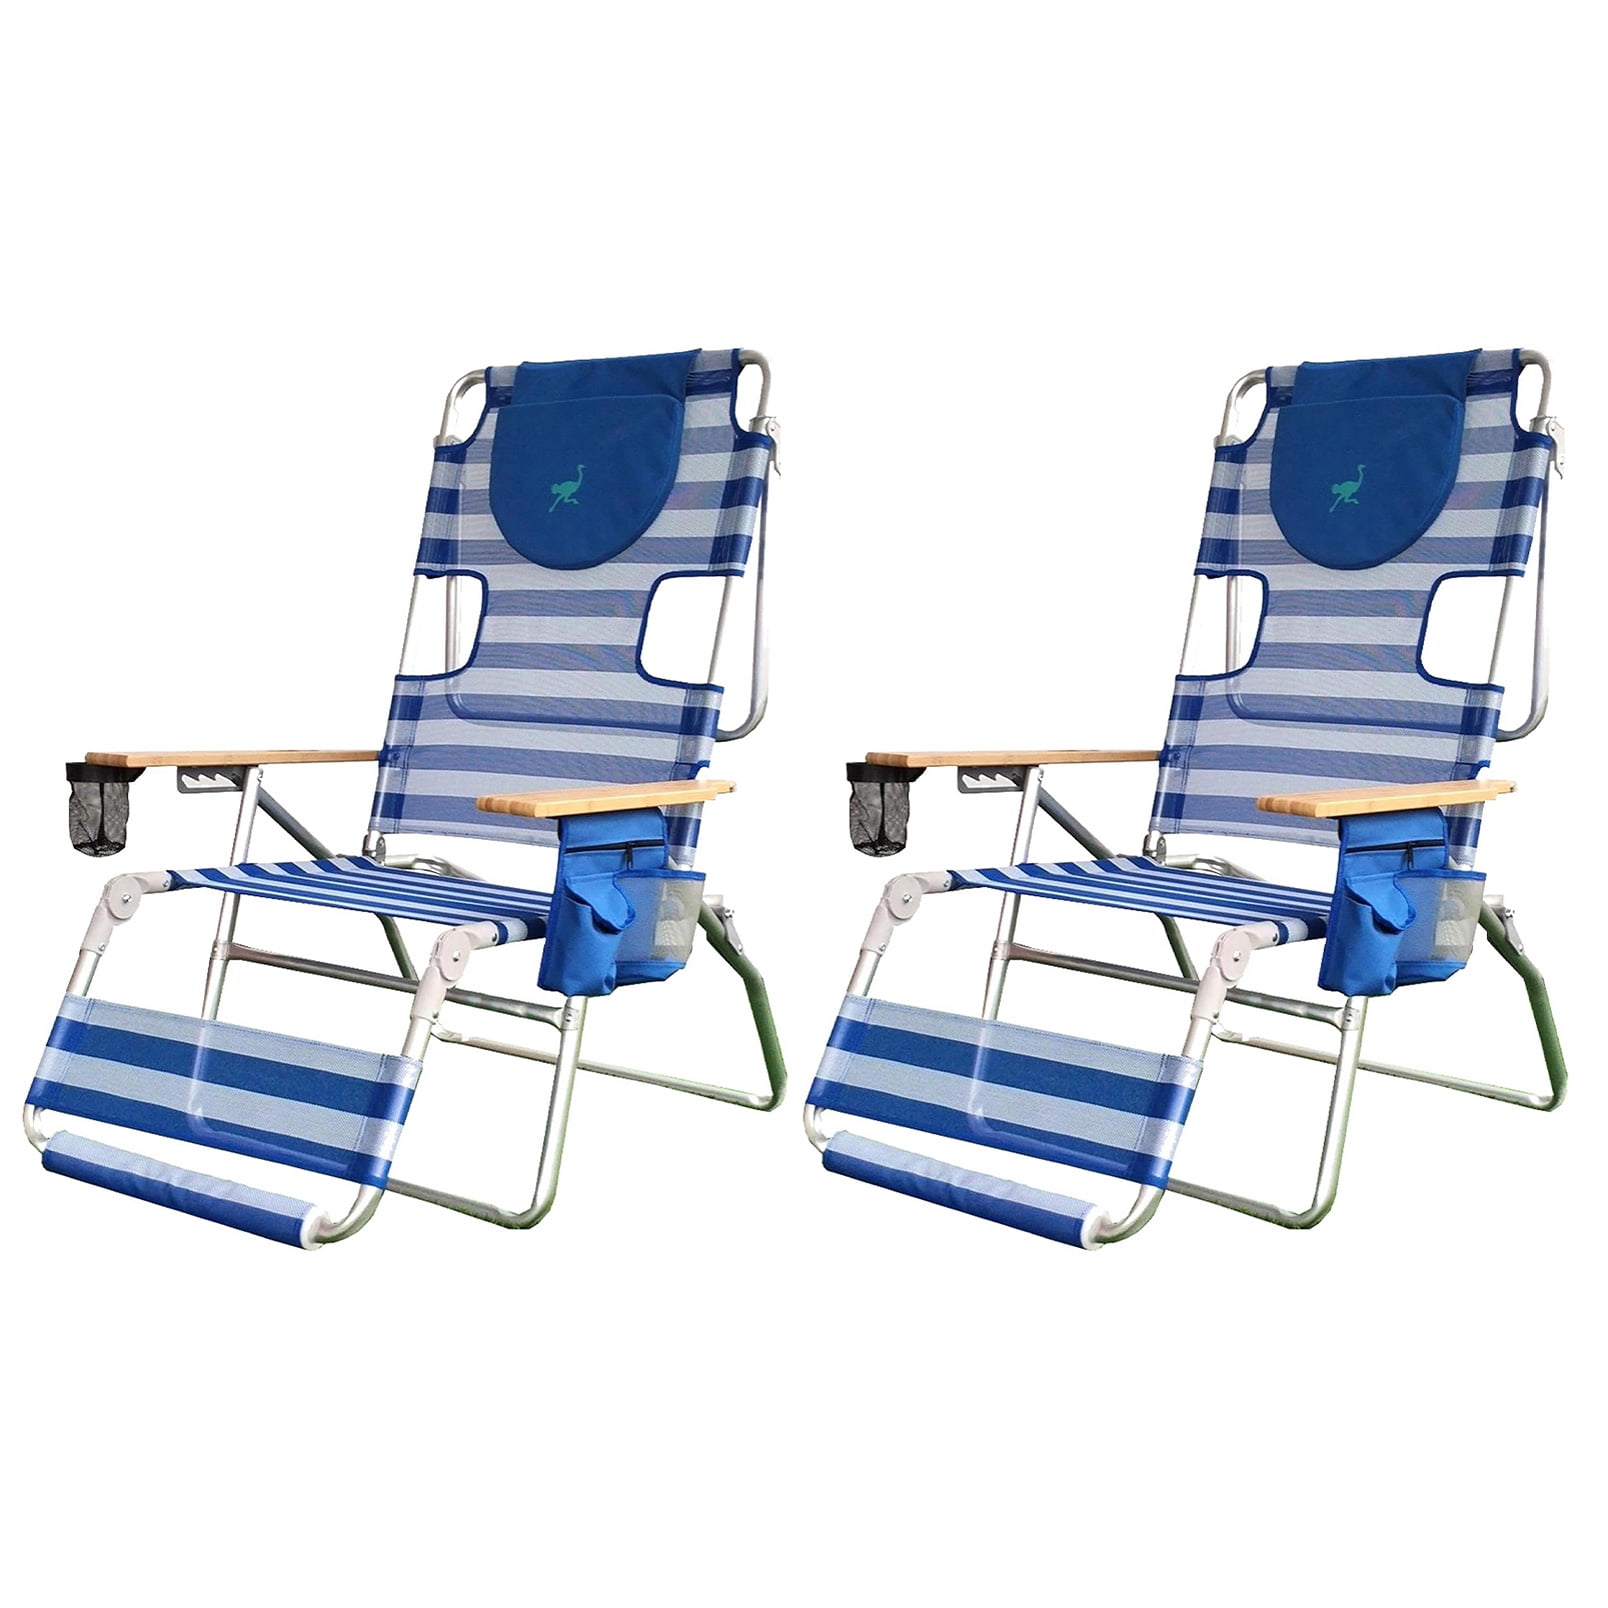  3 In 1 Beach Lounge Chair for Simple Design